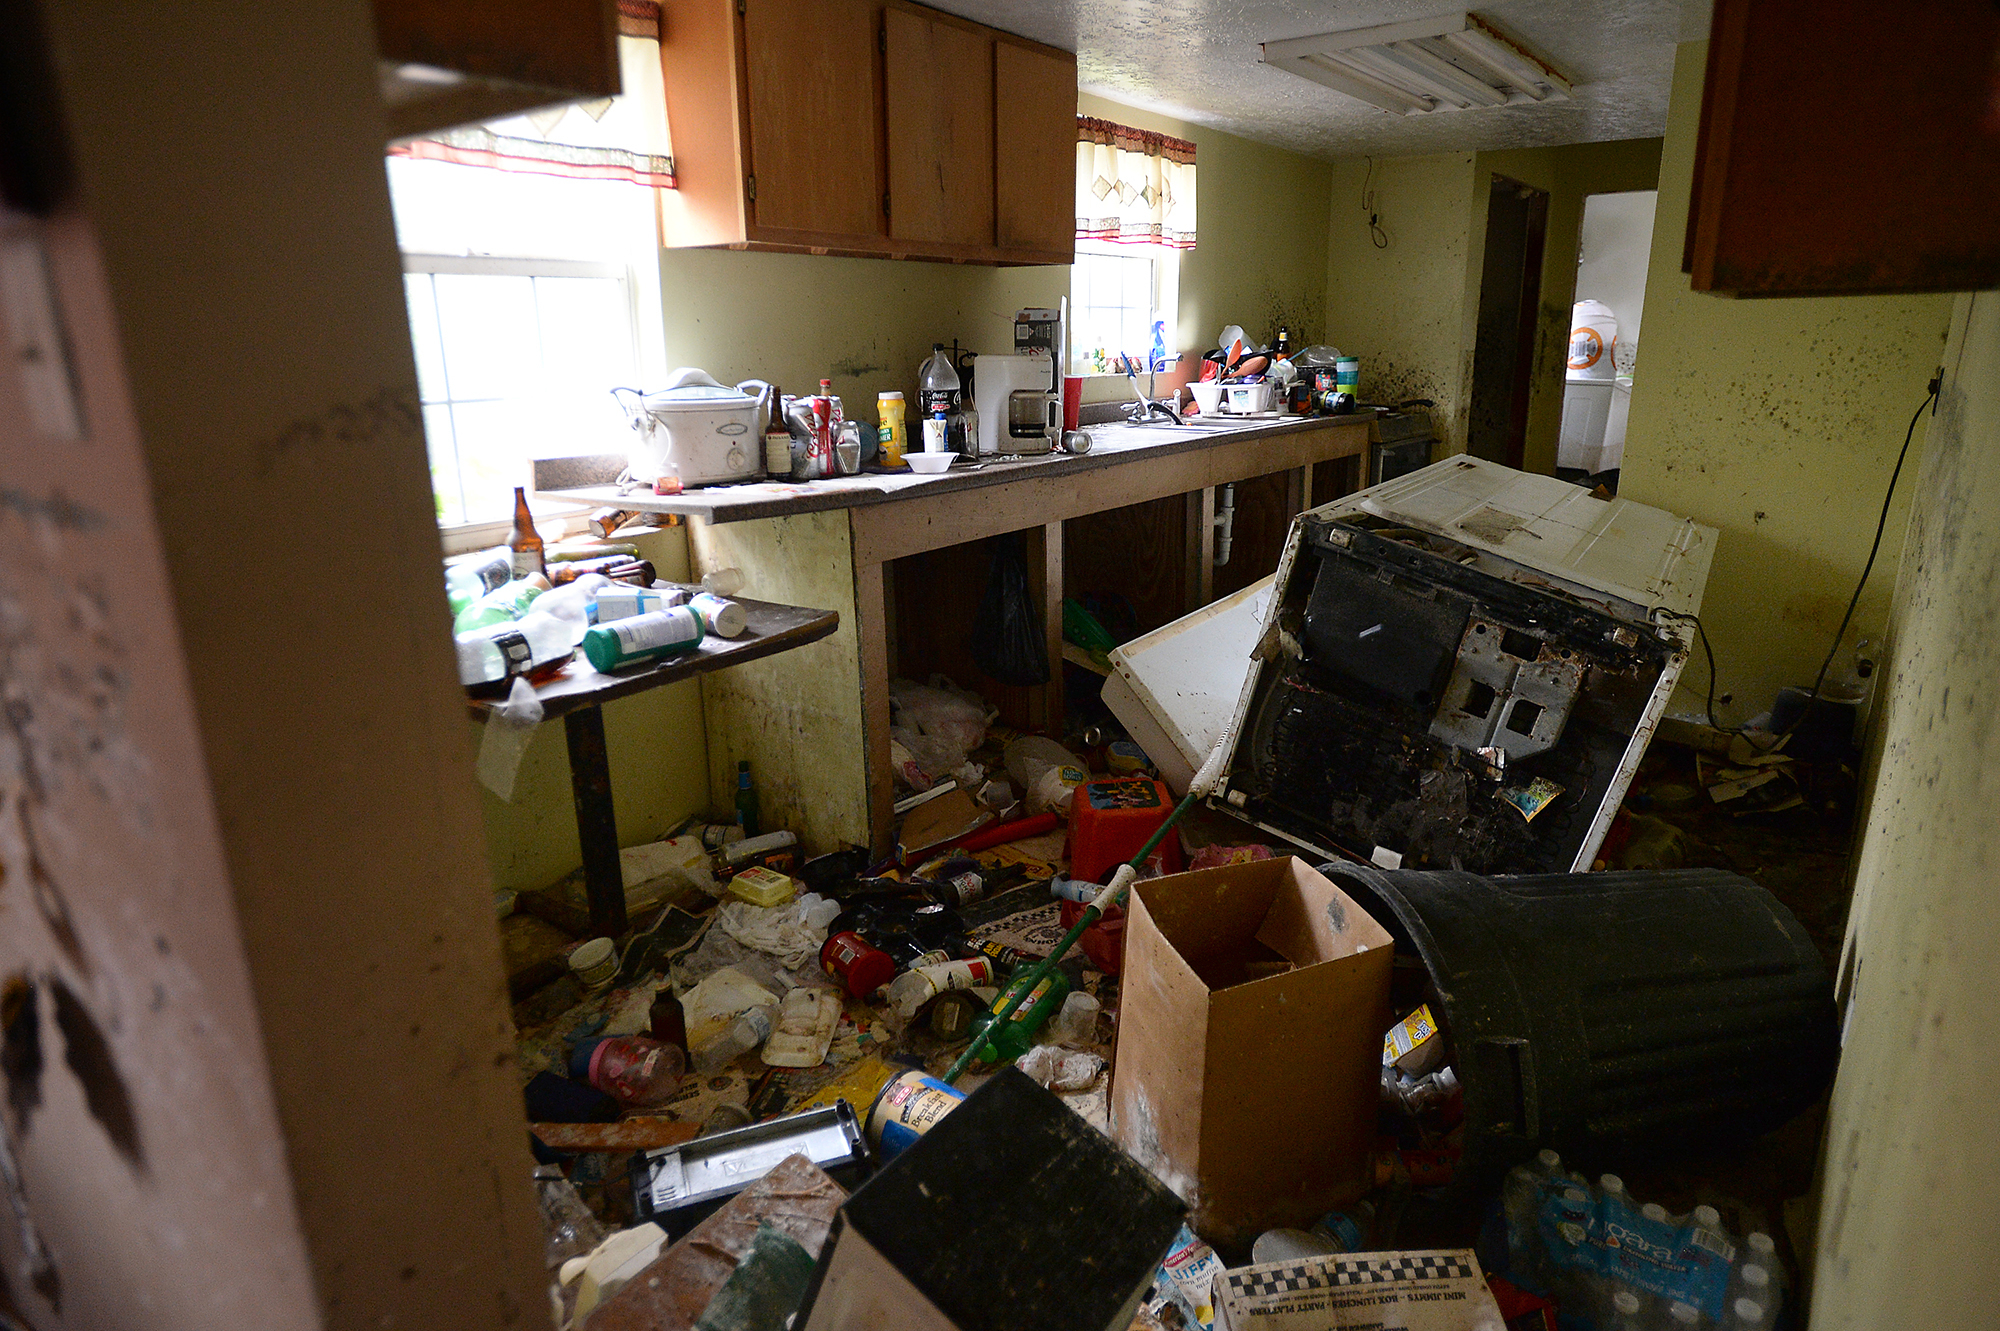  Jennifer and Steven Kaufman's home is filled with flood damaged items that floated throughout the residence as it took on water when Tropical Storm Harvey hit. The several of feet of water has since receded, leaving behind ayers of dirt and quickly 